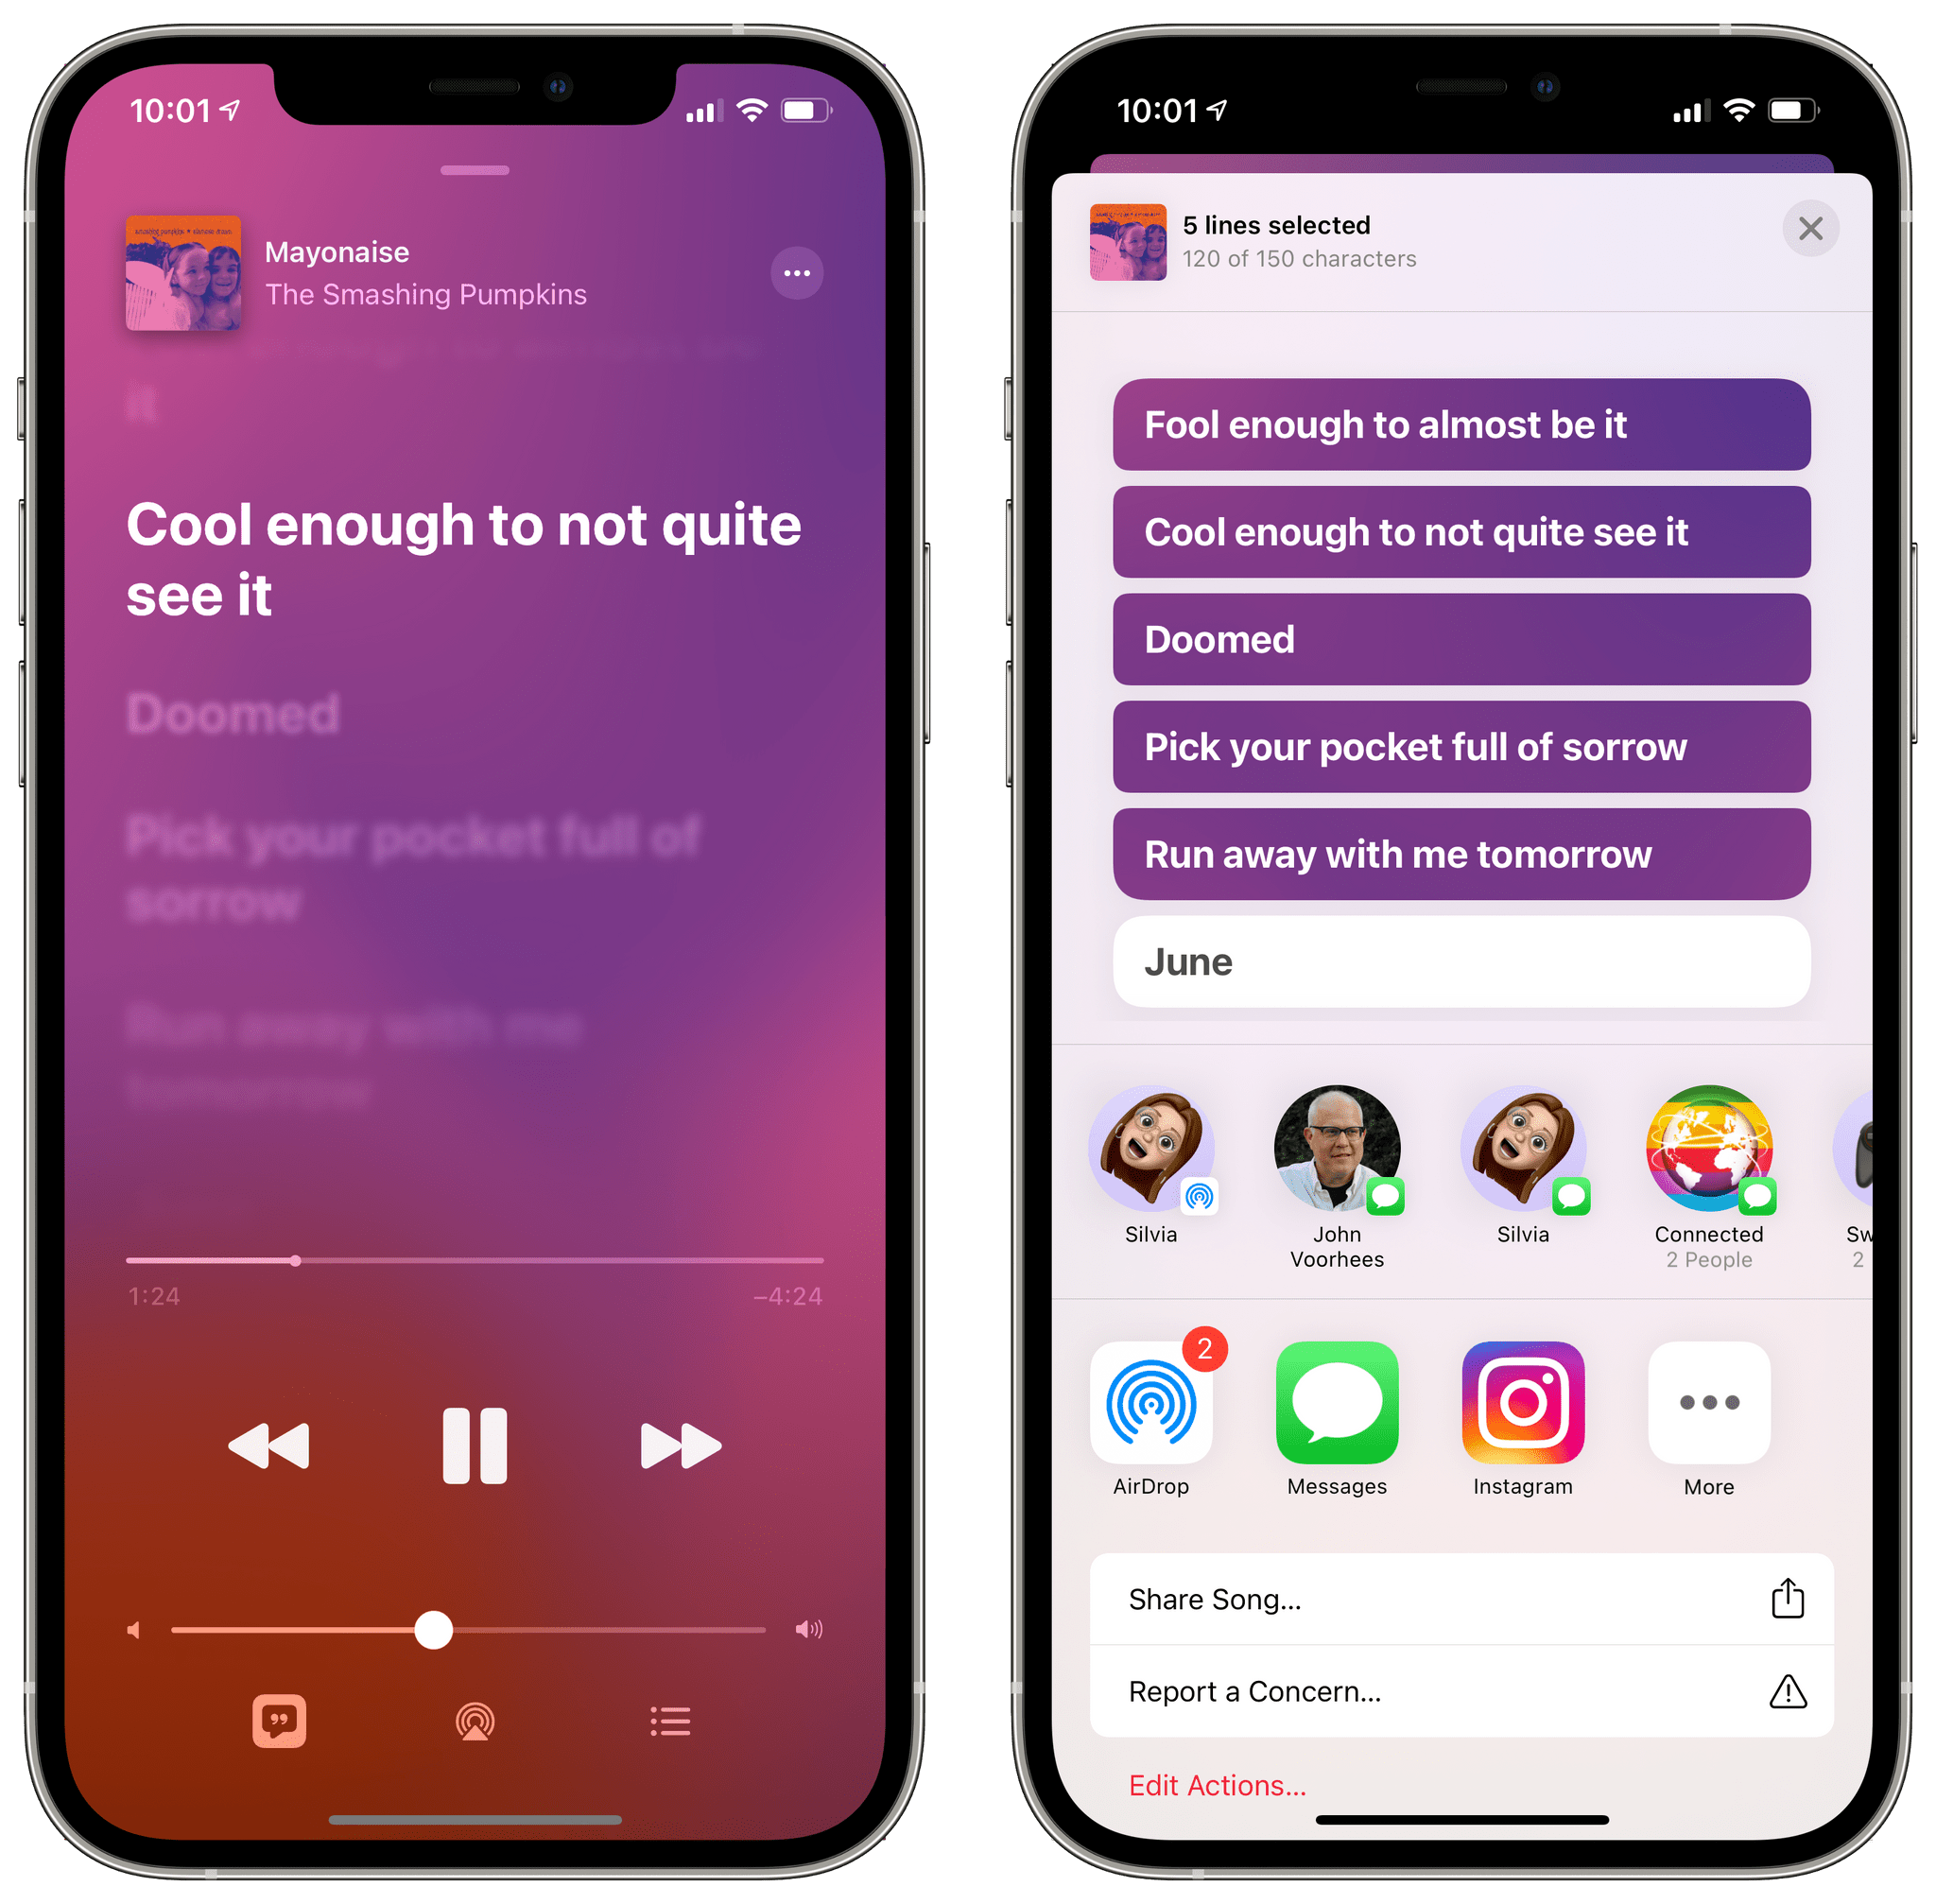 Tap and hold real-time lyrics in iOS 14.5 to share them.